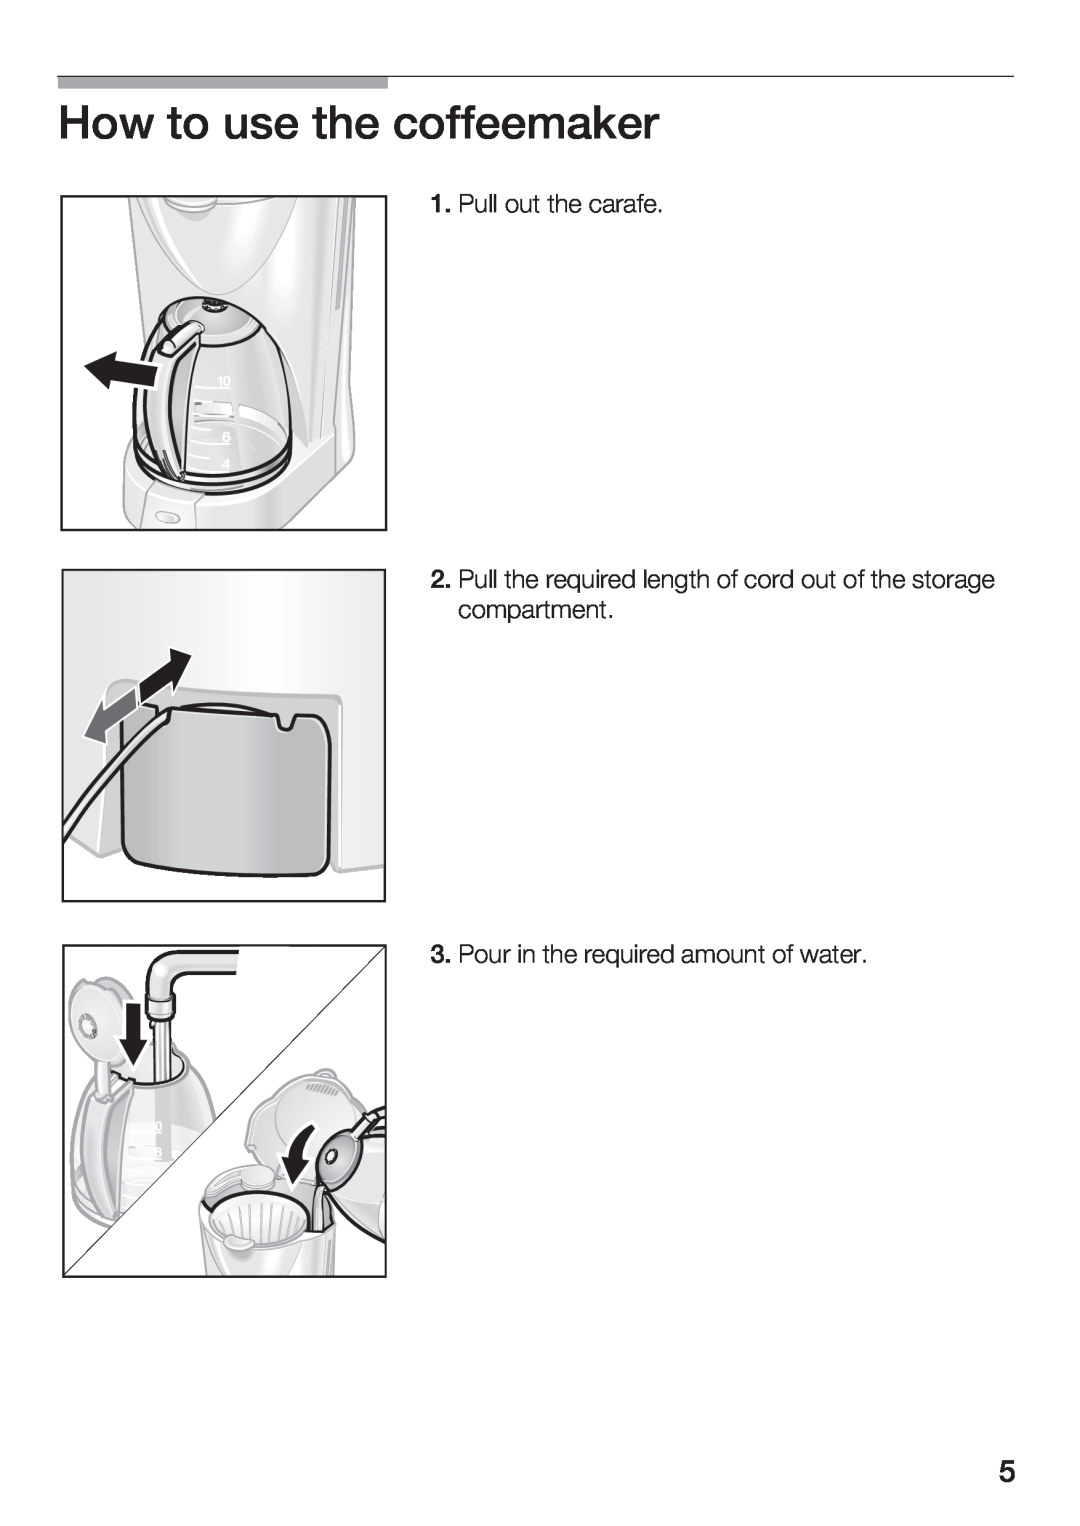 Bosch Appliances TKA280, 283UC manual How to use the coffeemaker, Pull out the carafe, Pour in the required amount of water 